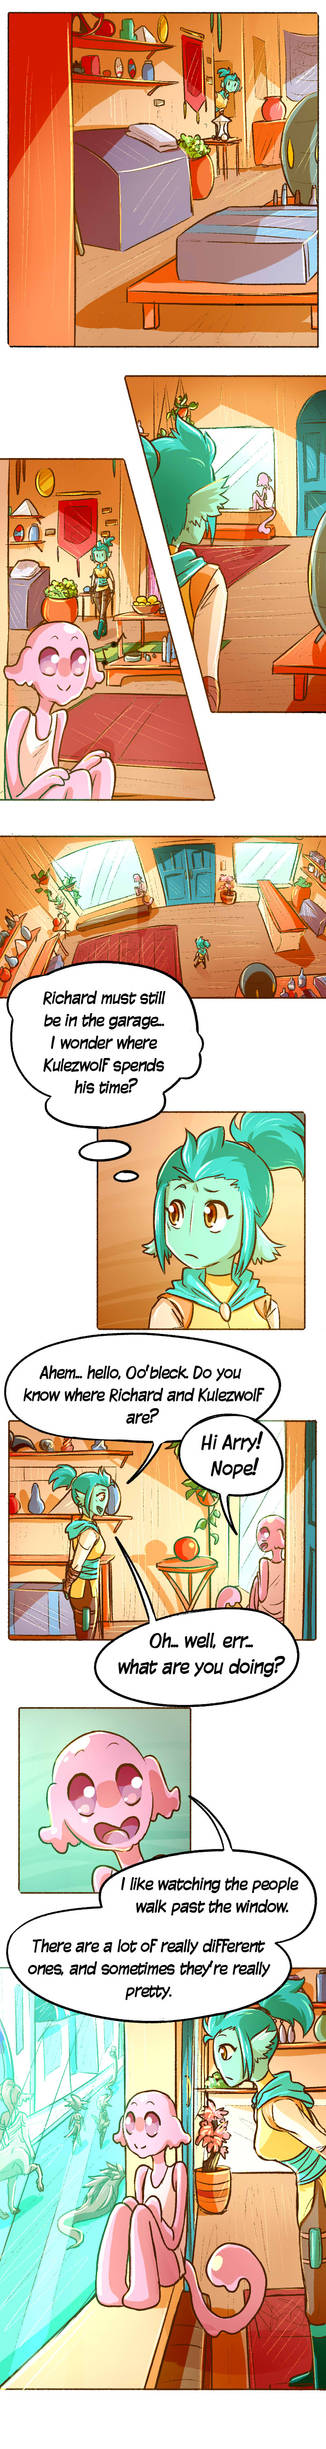 Star Chasers: Pg 225